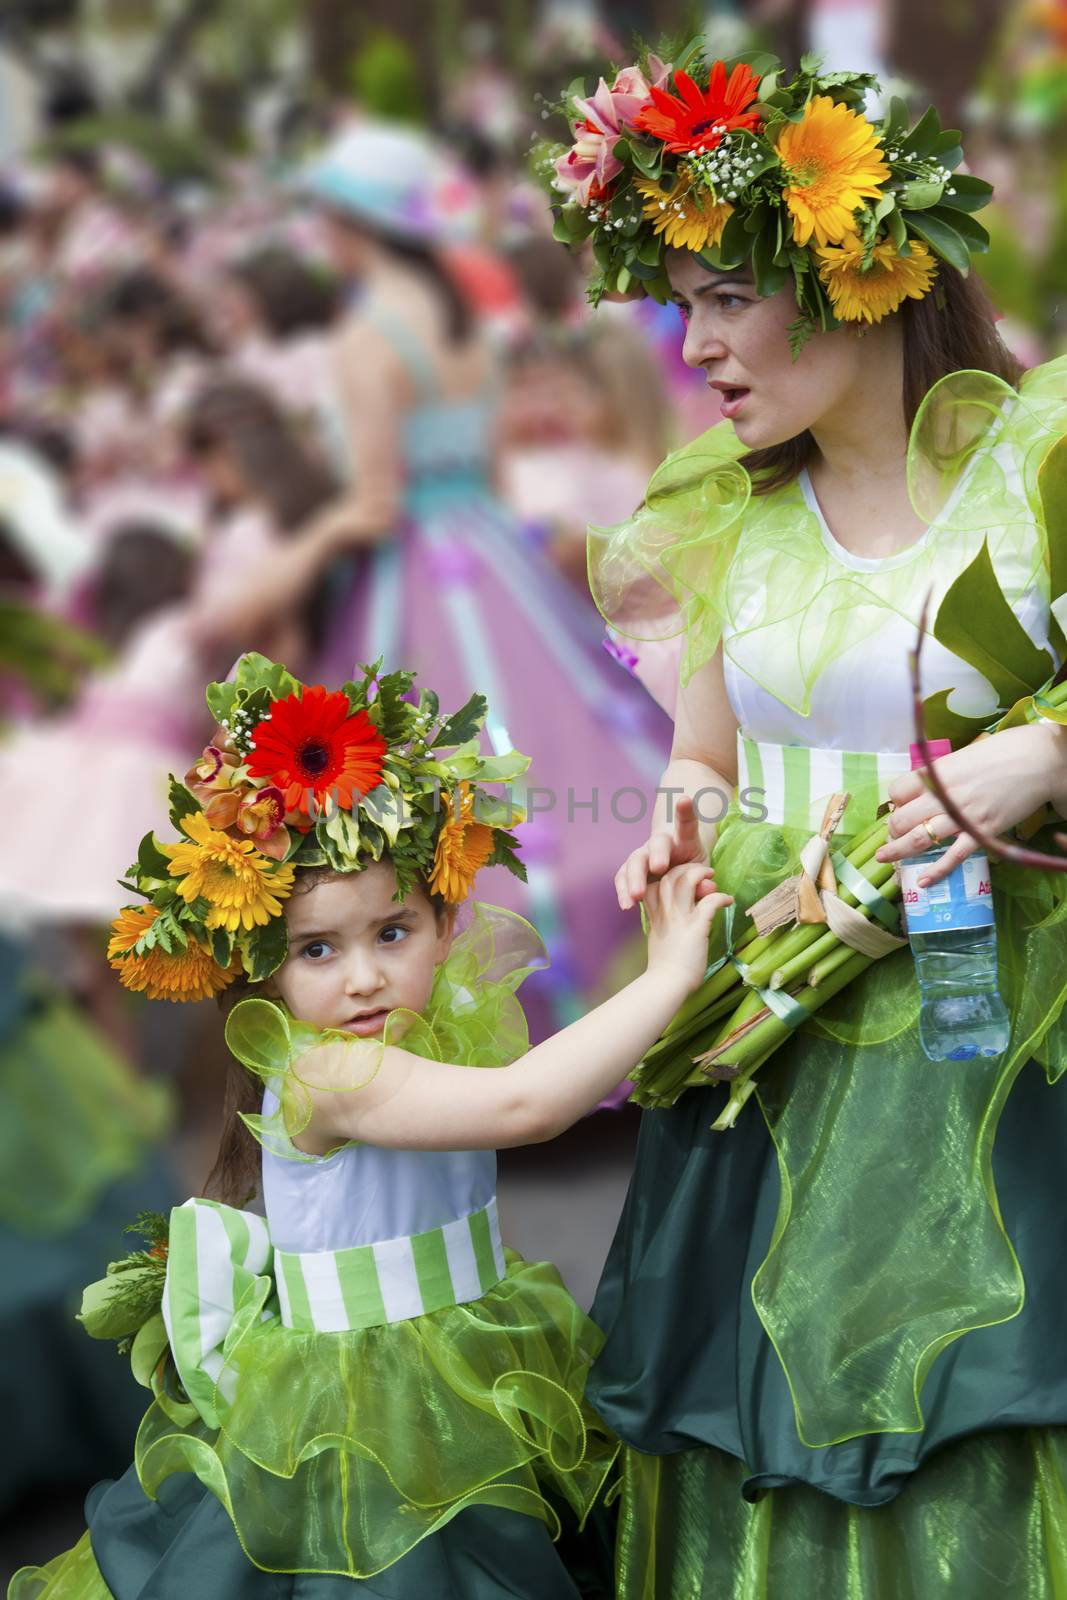 Performers with colorful and elaborate costumes taking part in the Parade of Flower Festival on the Madeira Island, Portugal.